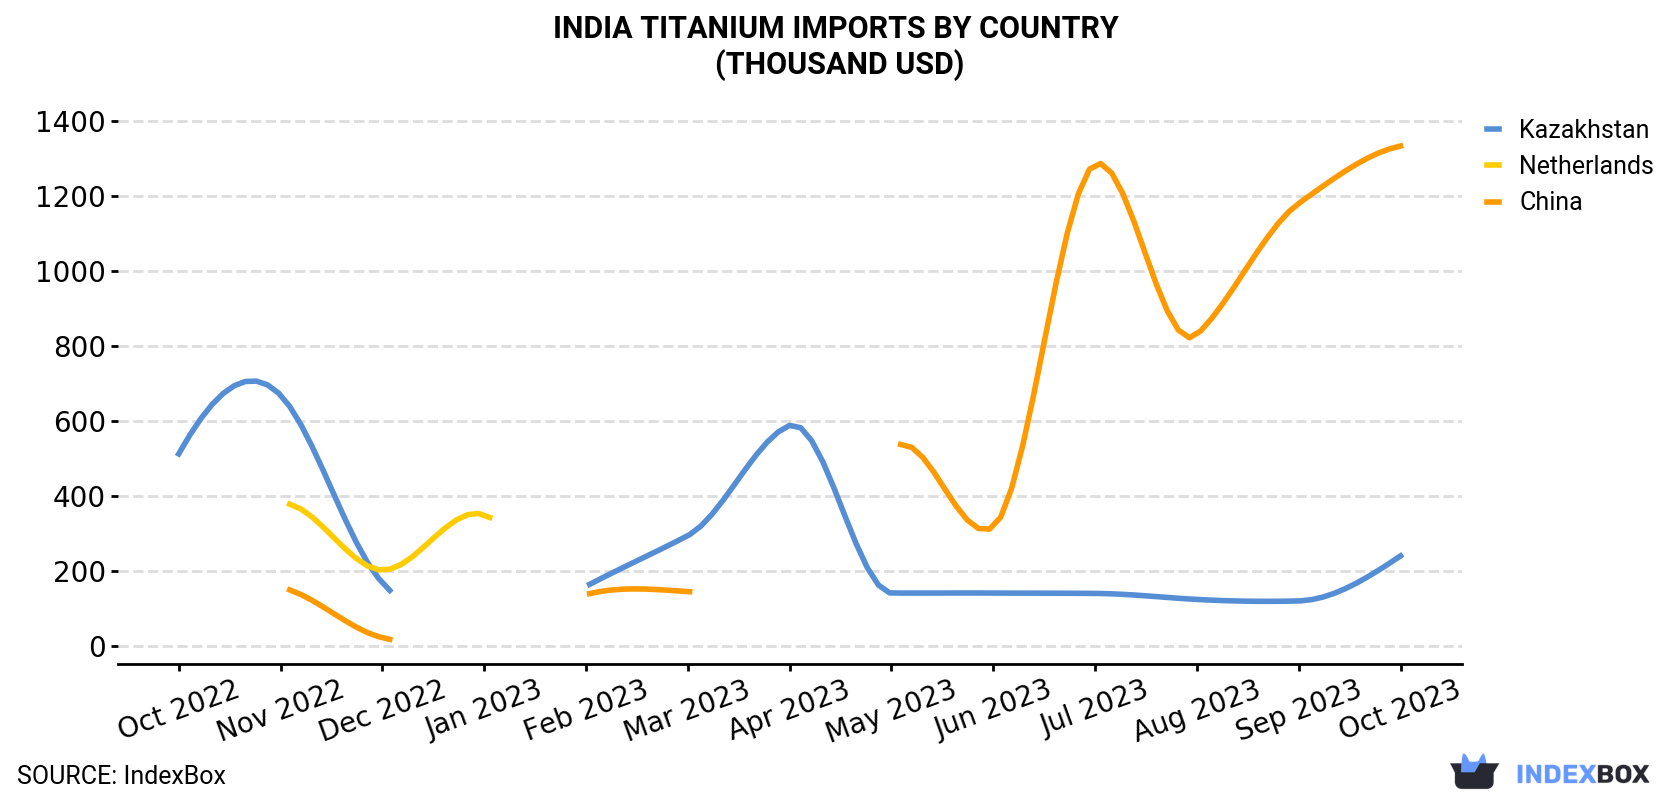 India Titanium Imports By Country (Thousand USD)